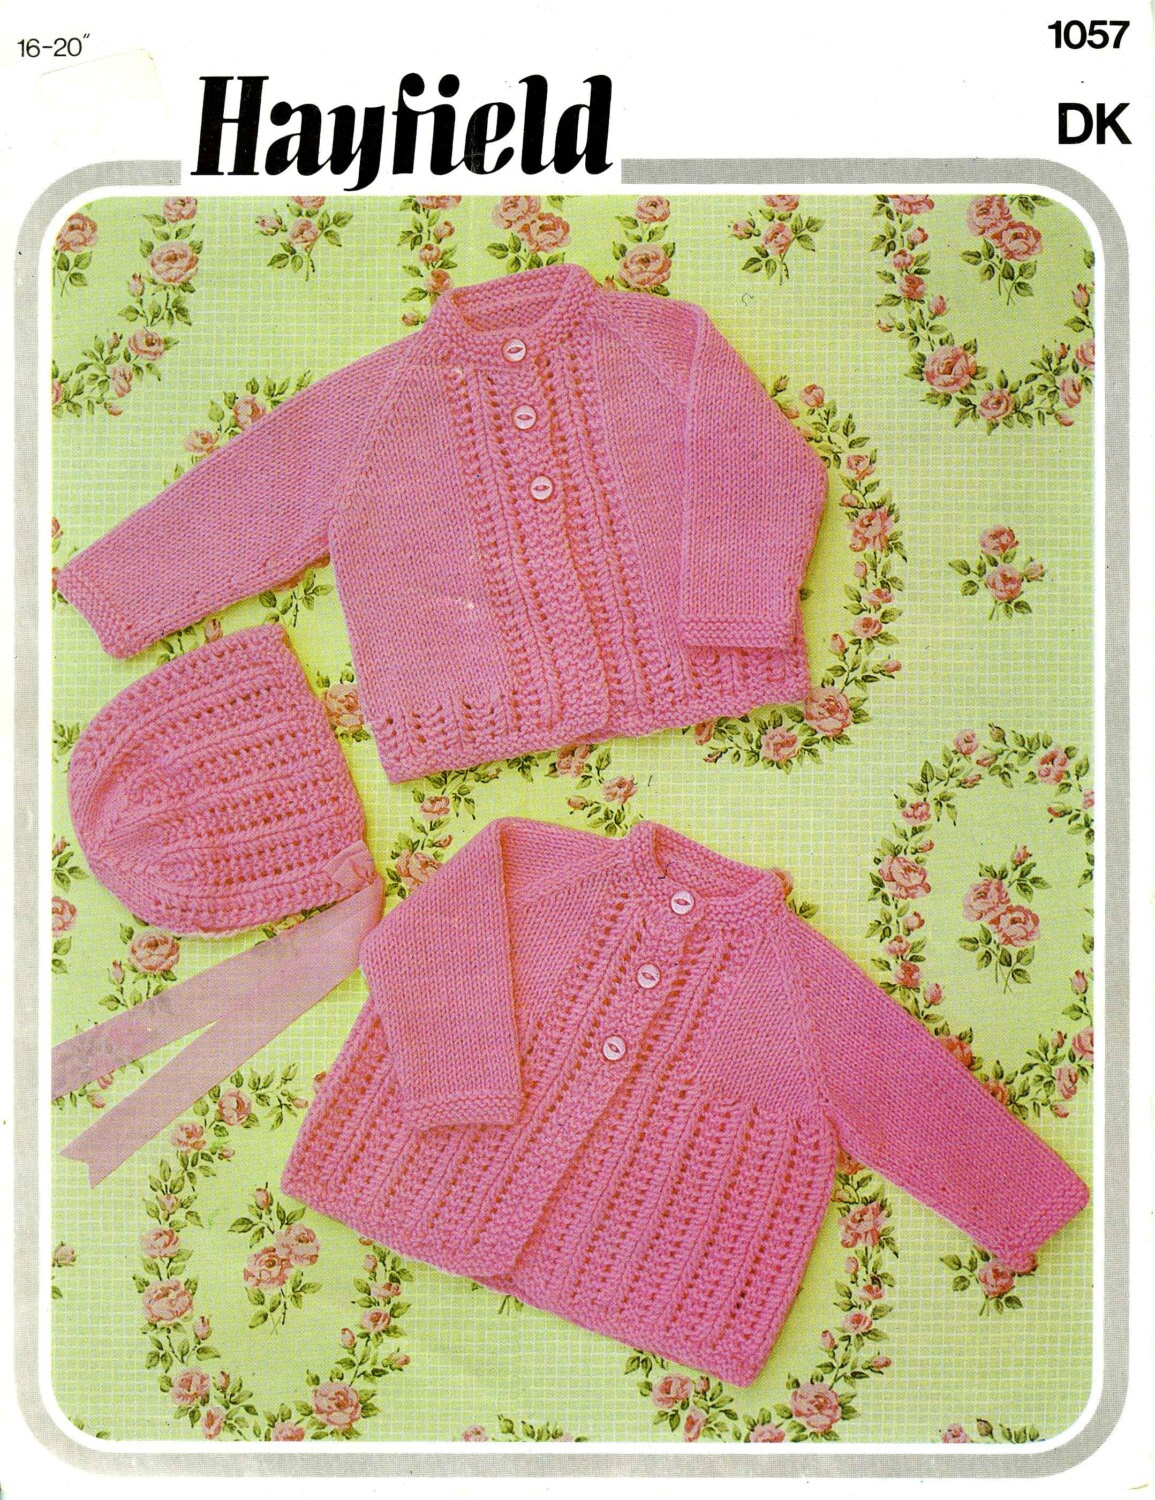 Baby Coat / Cardigan and Bonnet, 16"-20" Chest, DK, 70s Knitting Pattern, Hayfield 1057